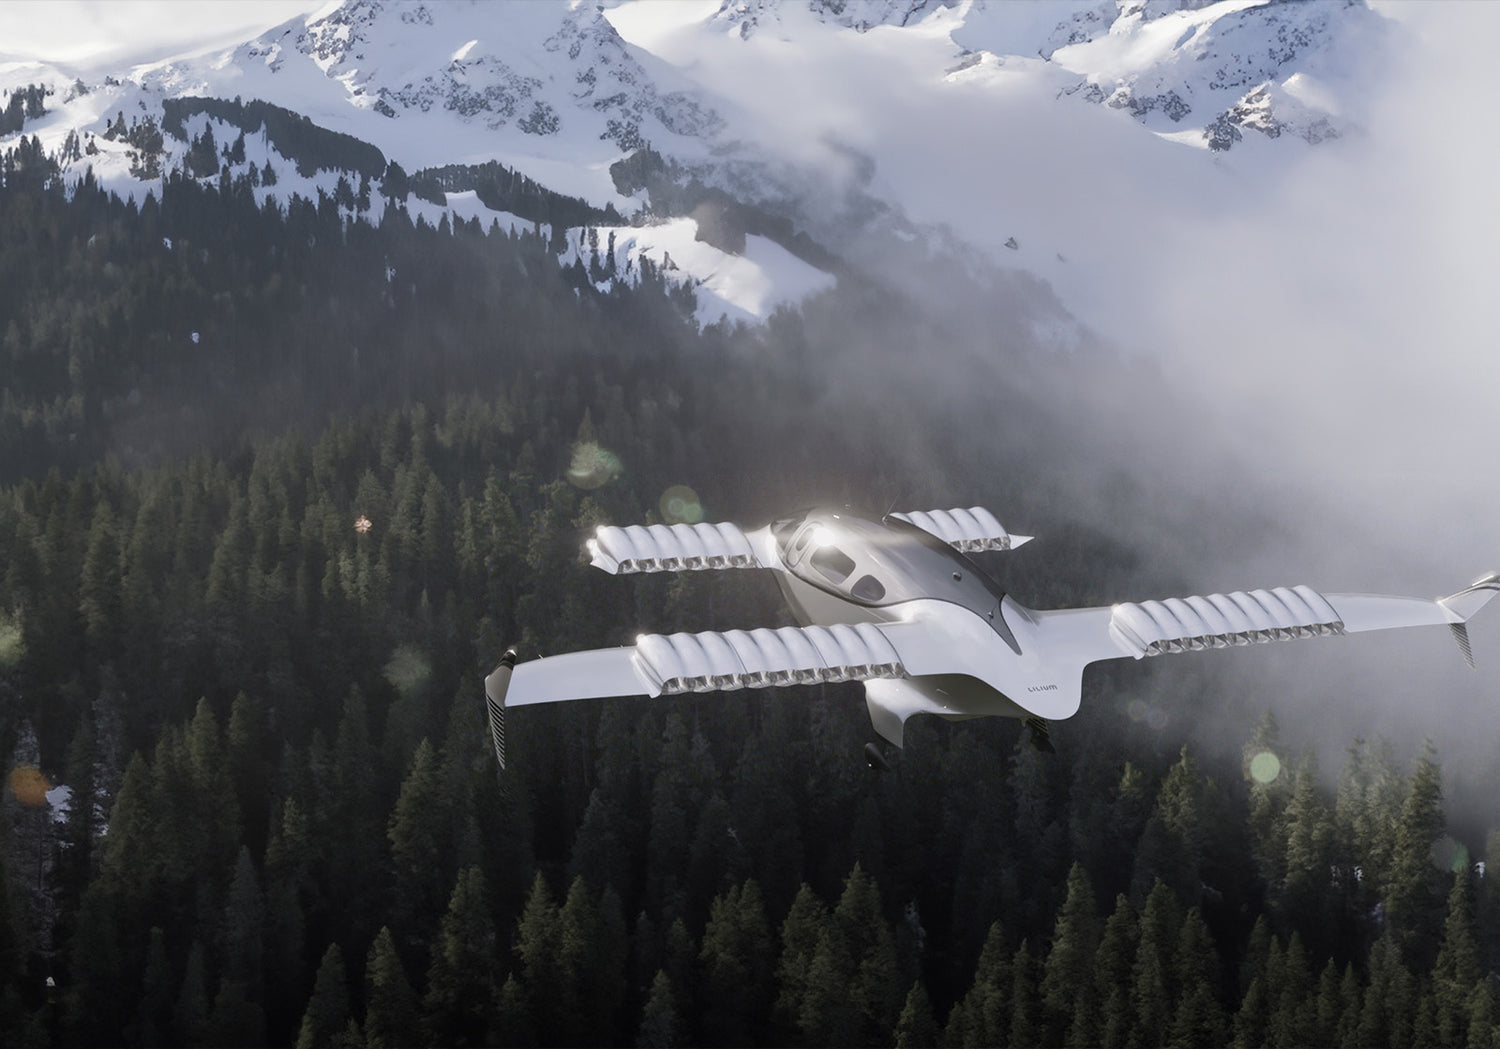 LILIUM RECEIVES EU APPROVAL FOR ITS ELECTRIC JETS